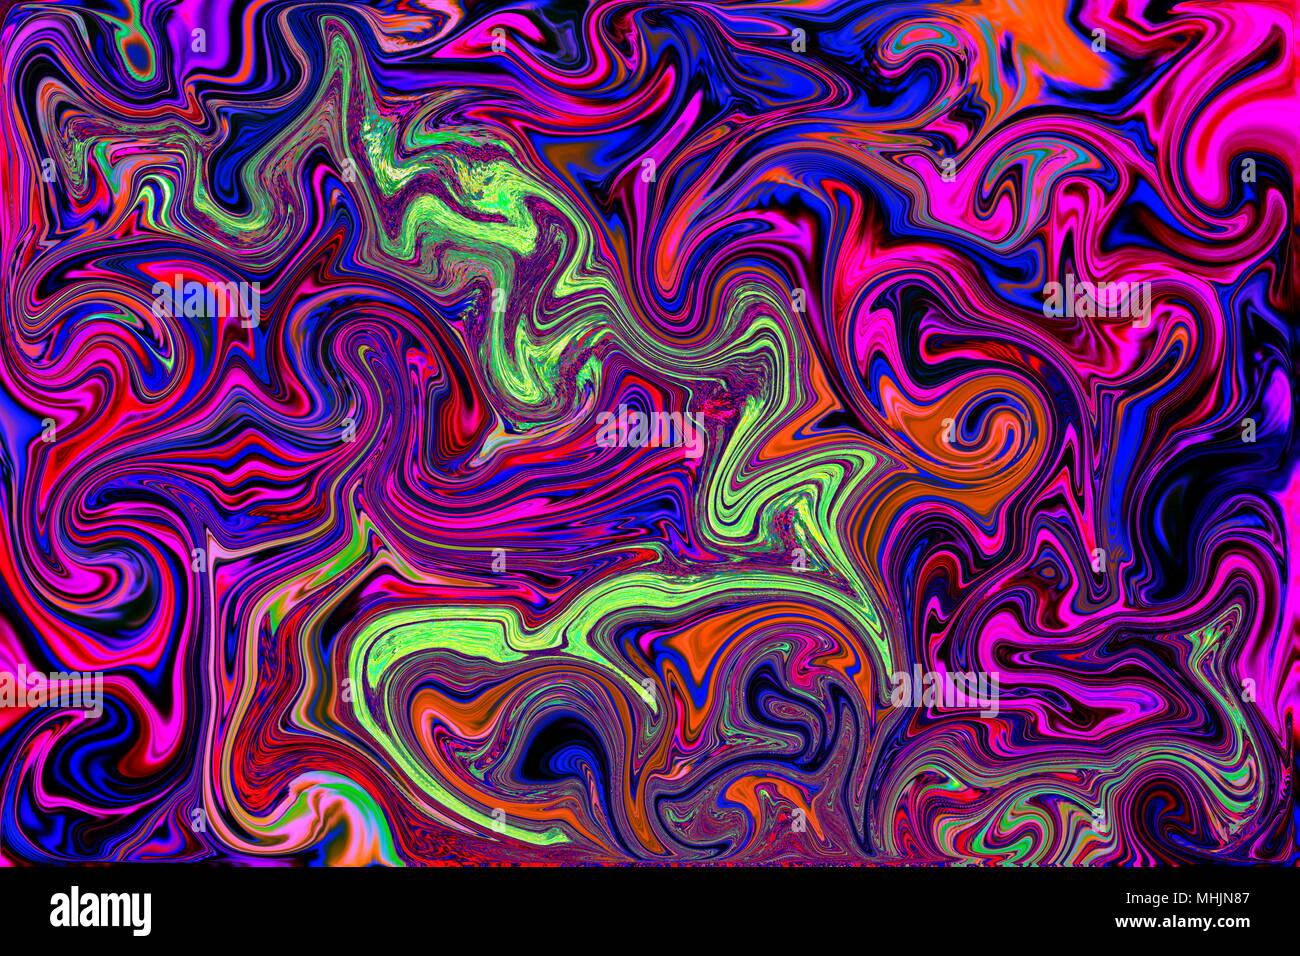 Abstract purple swirl insipred by the 90's culture Stock Photo